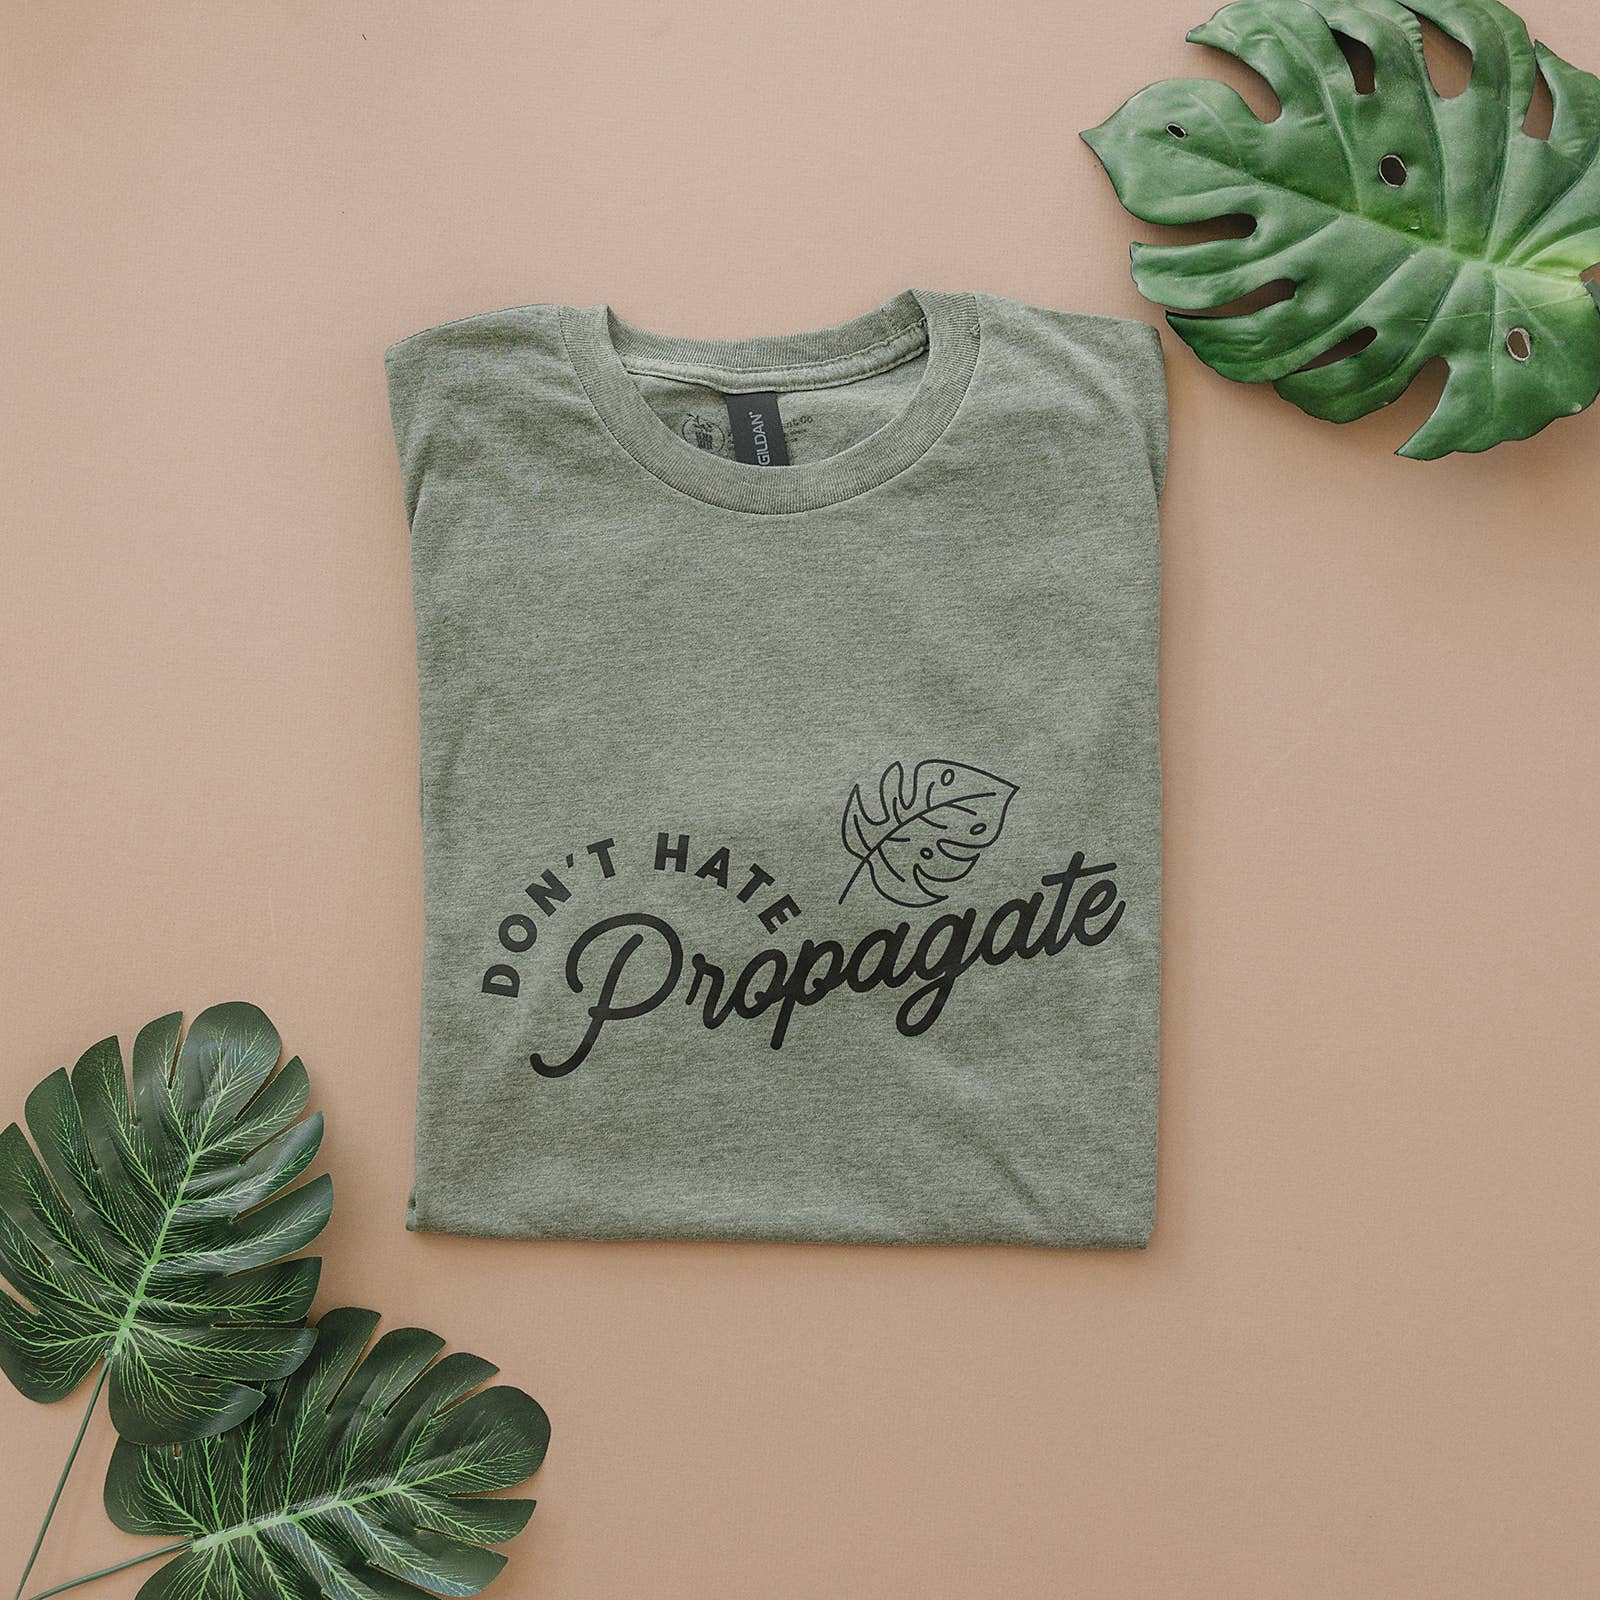 Packer Plant Co - "Don't Hate, Propagate" Plant Themed Graphic T-Shirt: Large / Heather Military Green